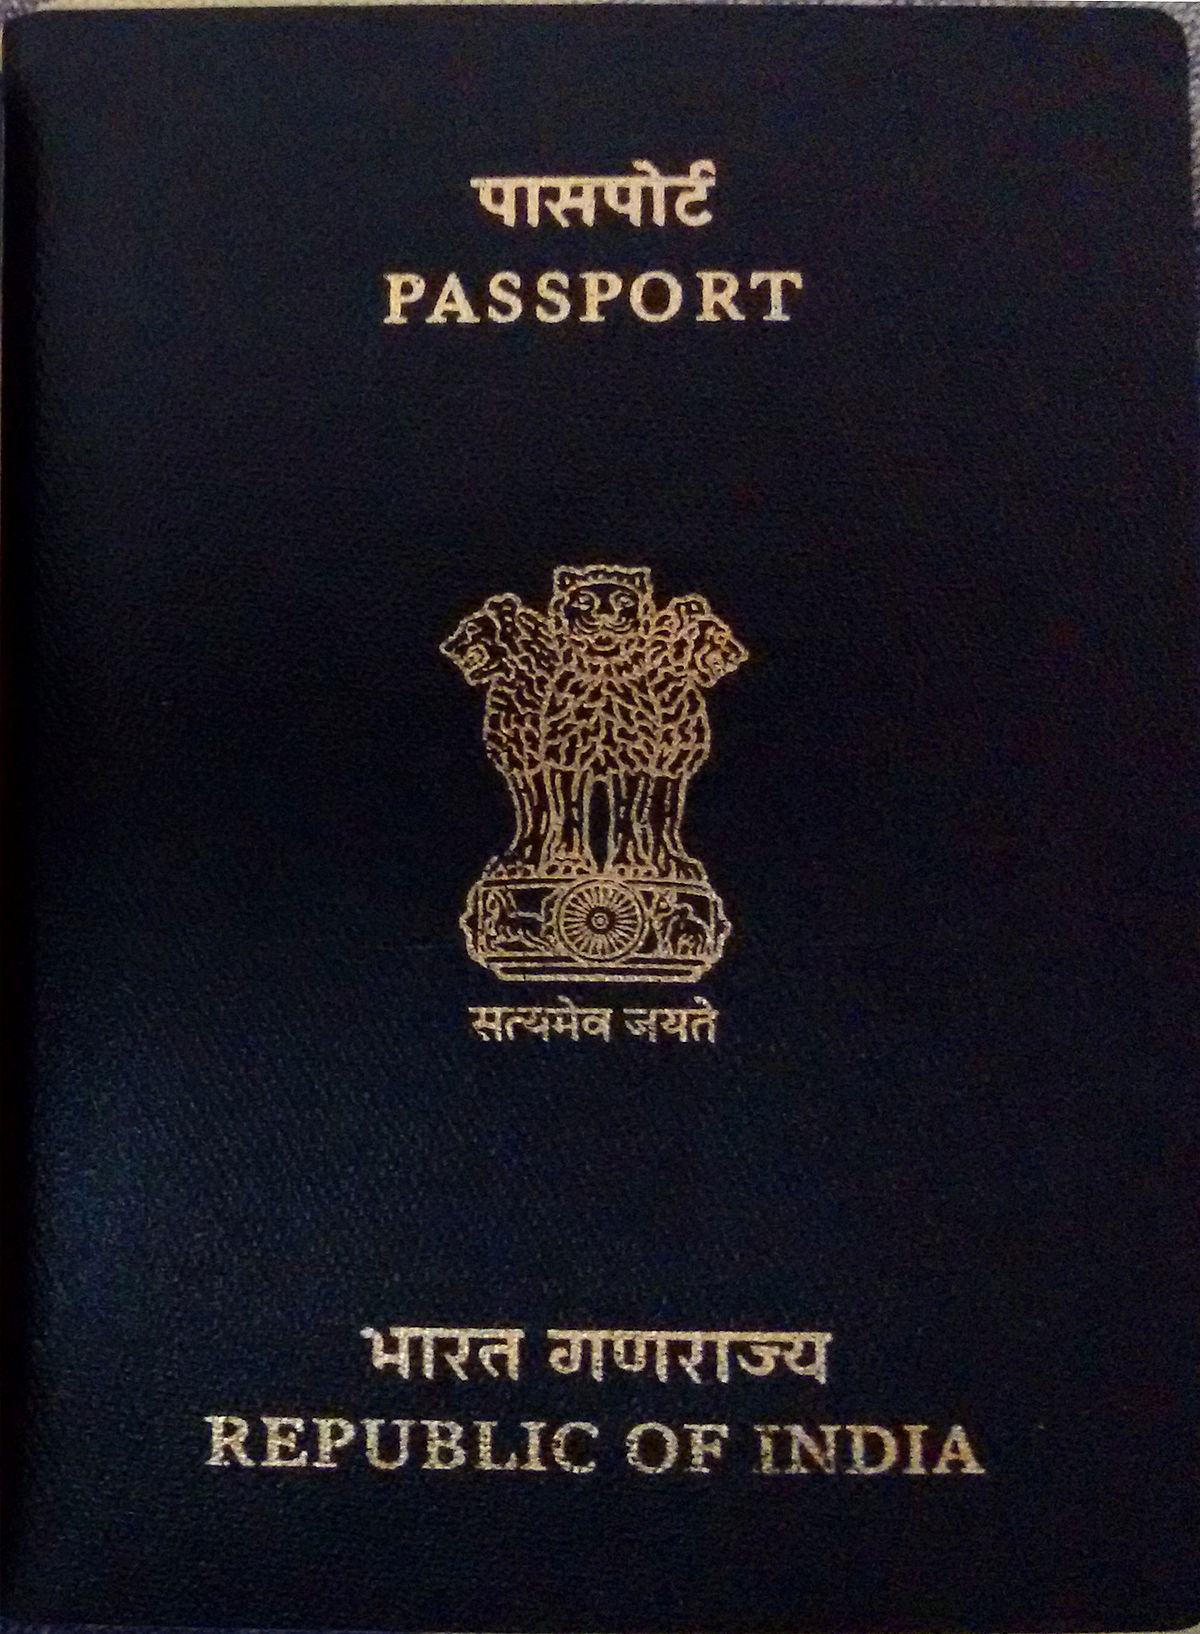 Mismatch Between India’s Worth, Economy, and Indian Passport